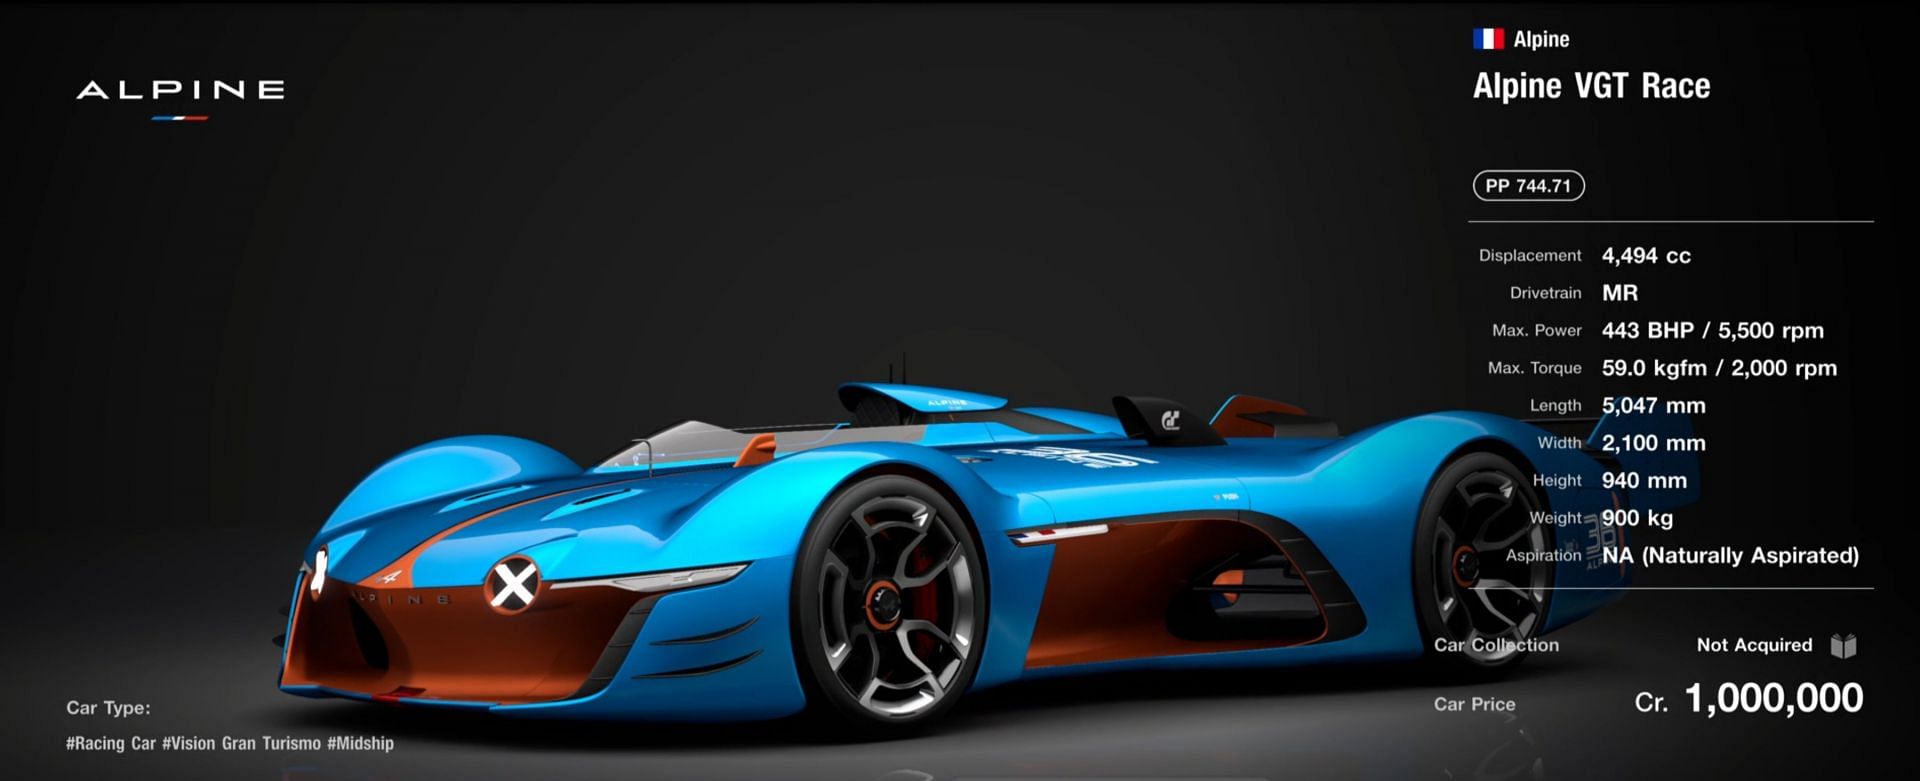 If a driver is looking for a sleek racing vehicle, Alpine has them covered (Image via Sony)